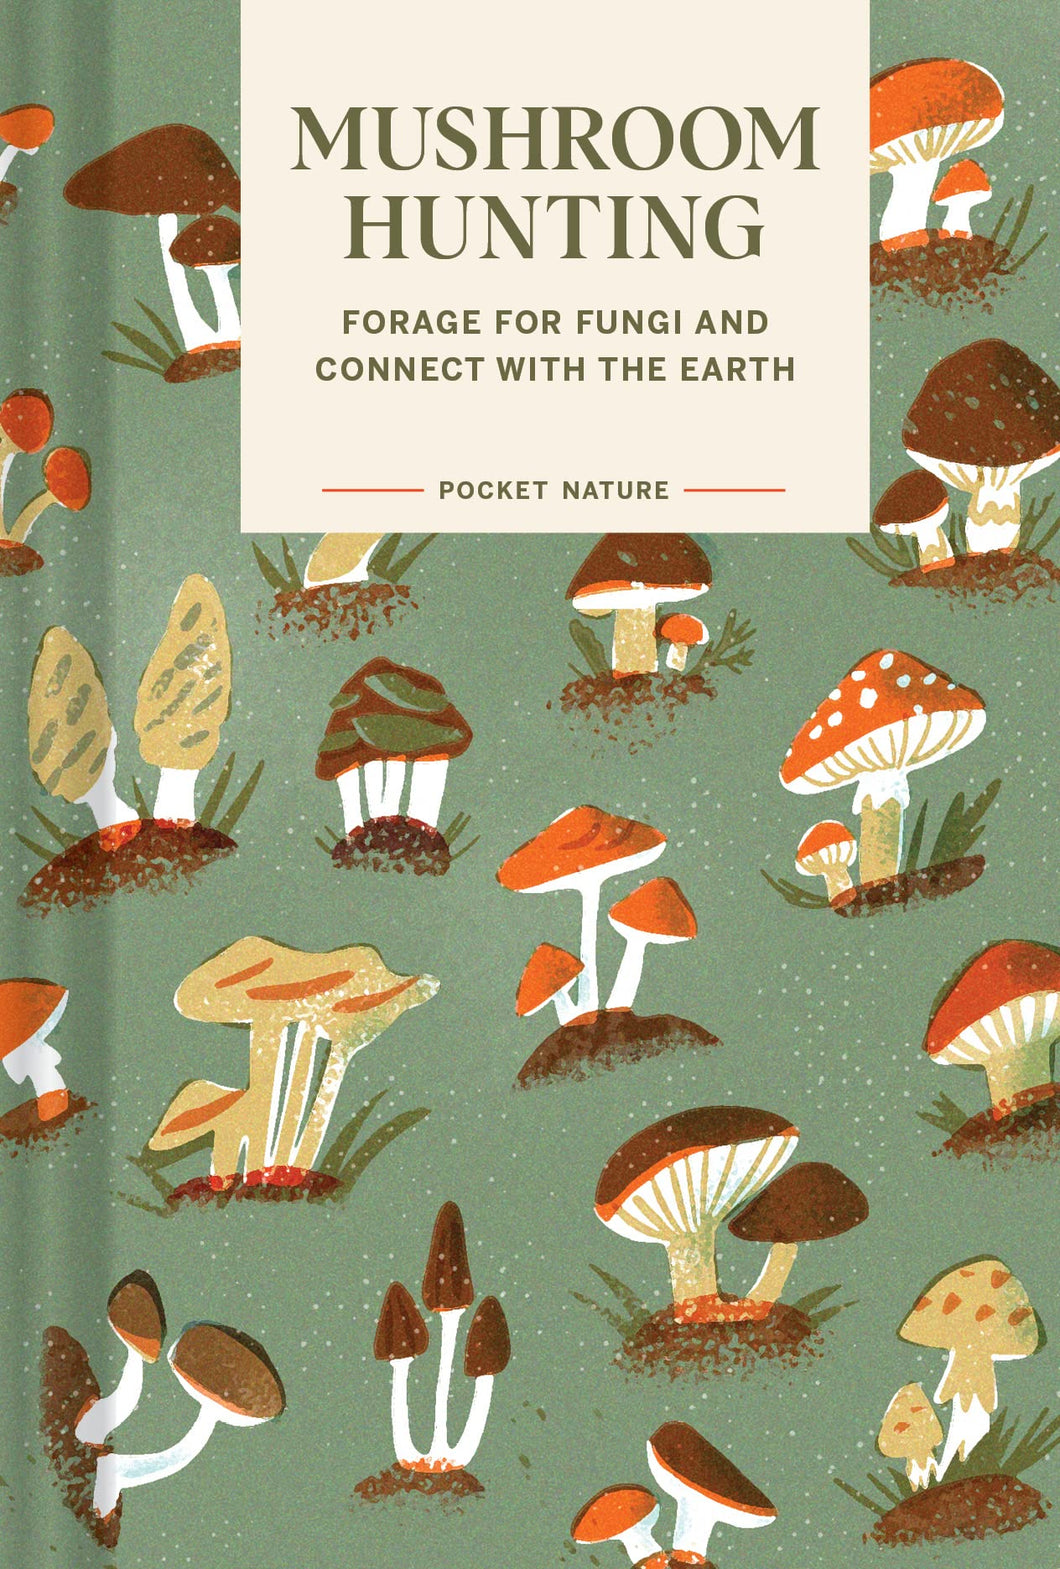 Pocket Nature: Mushroom Hunting: Forage For Fungi And Connect With The Earth [Emily Han & Gregory Han]